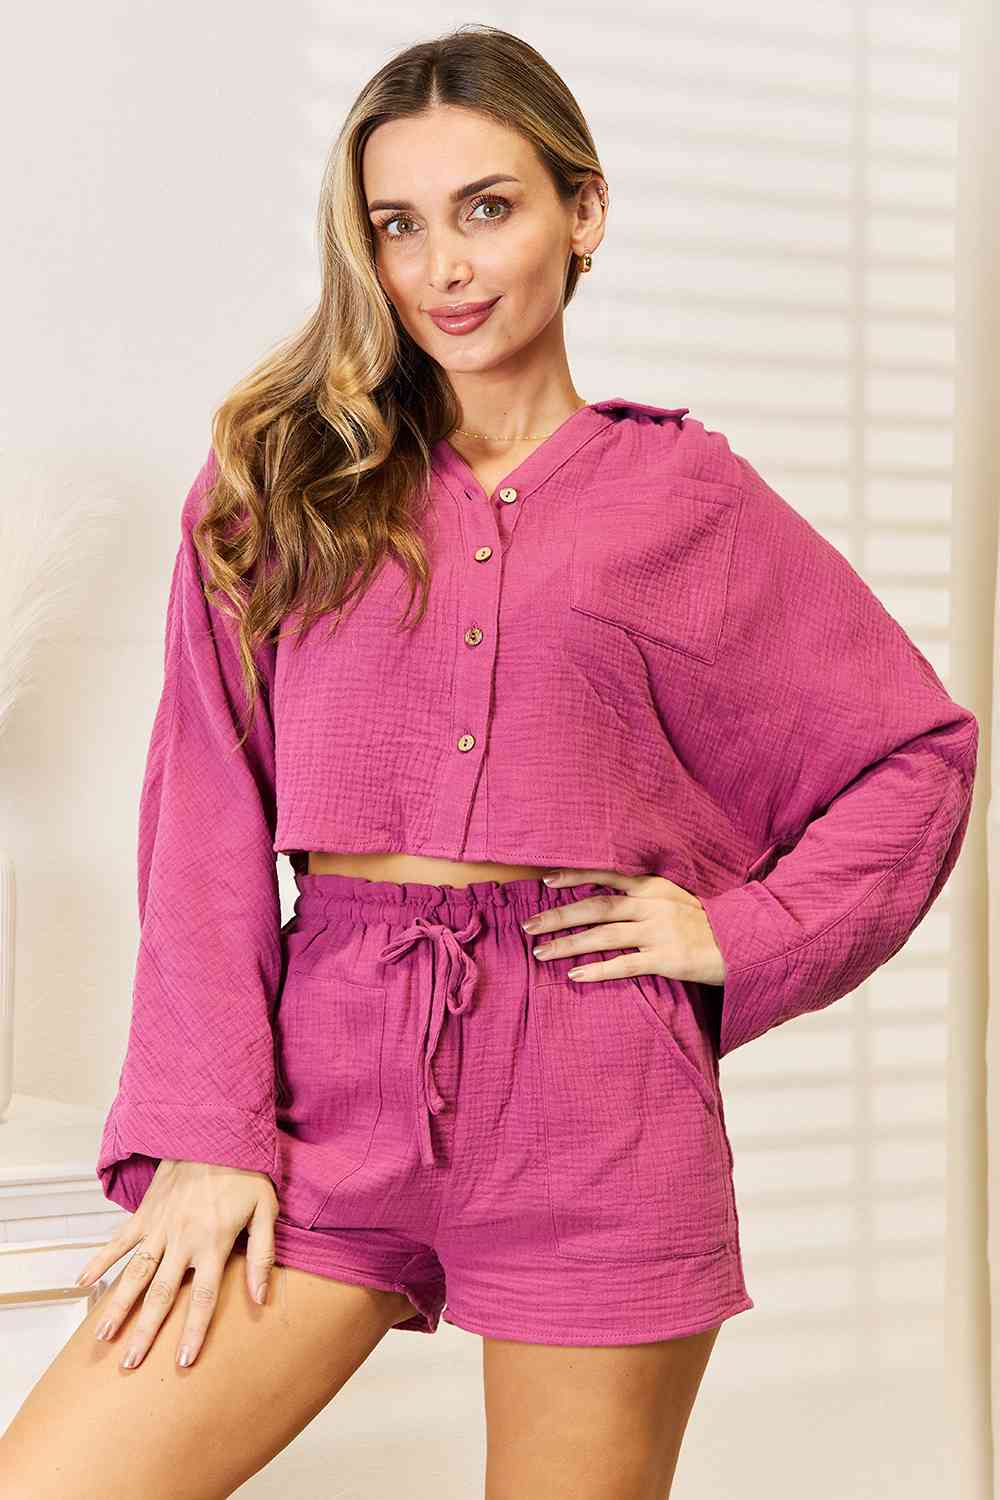 Buttoned Long Sleeve Top and Shorts Set - Pink / S - Camis & Tops - Outfit Sets - 1 - 2024